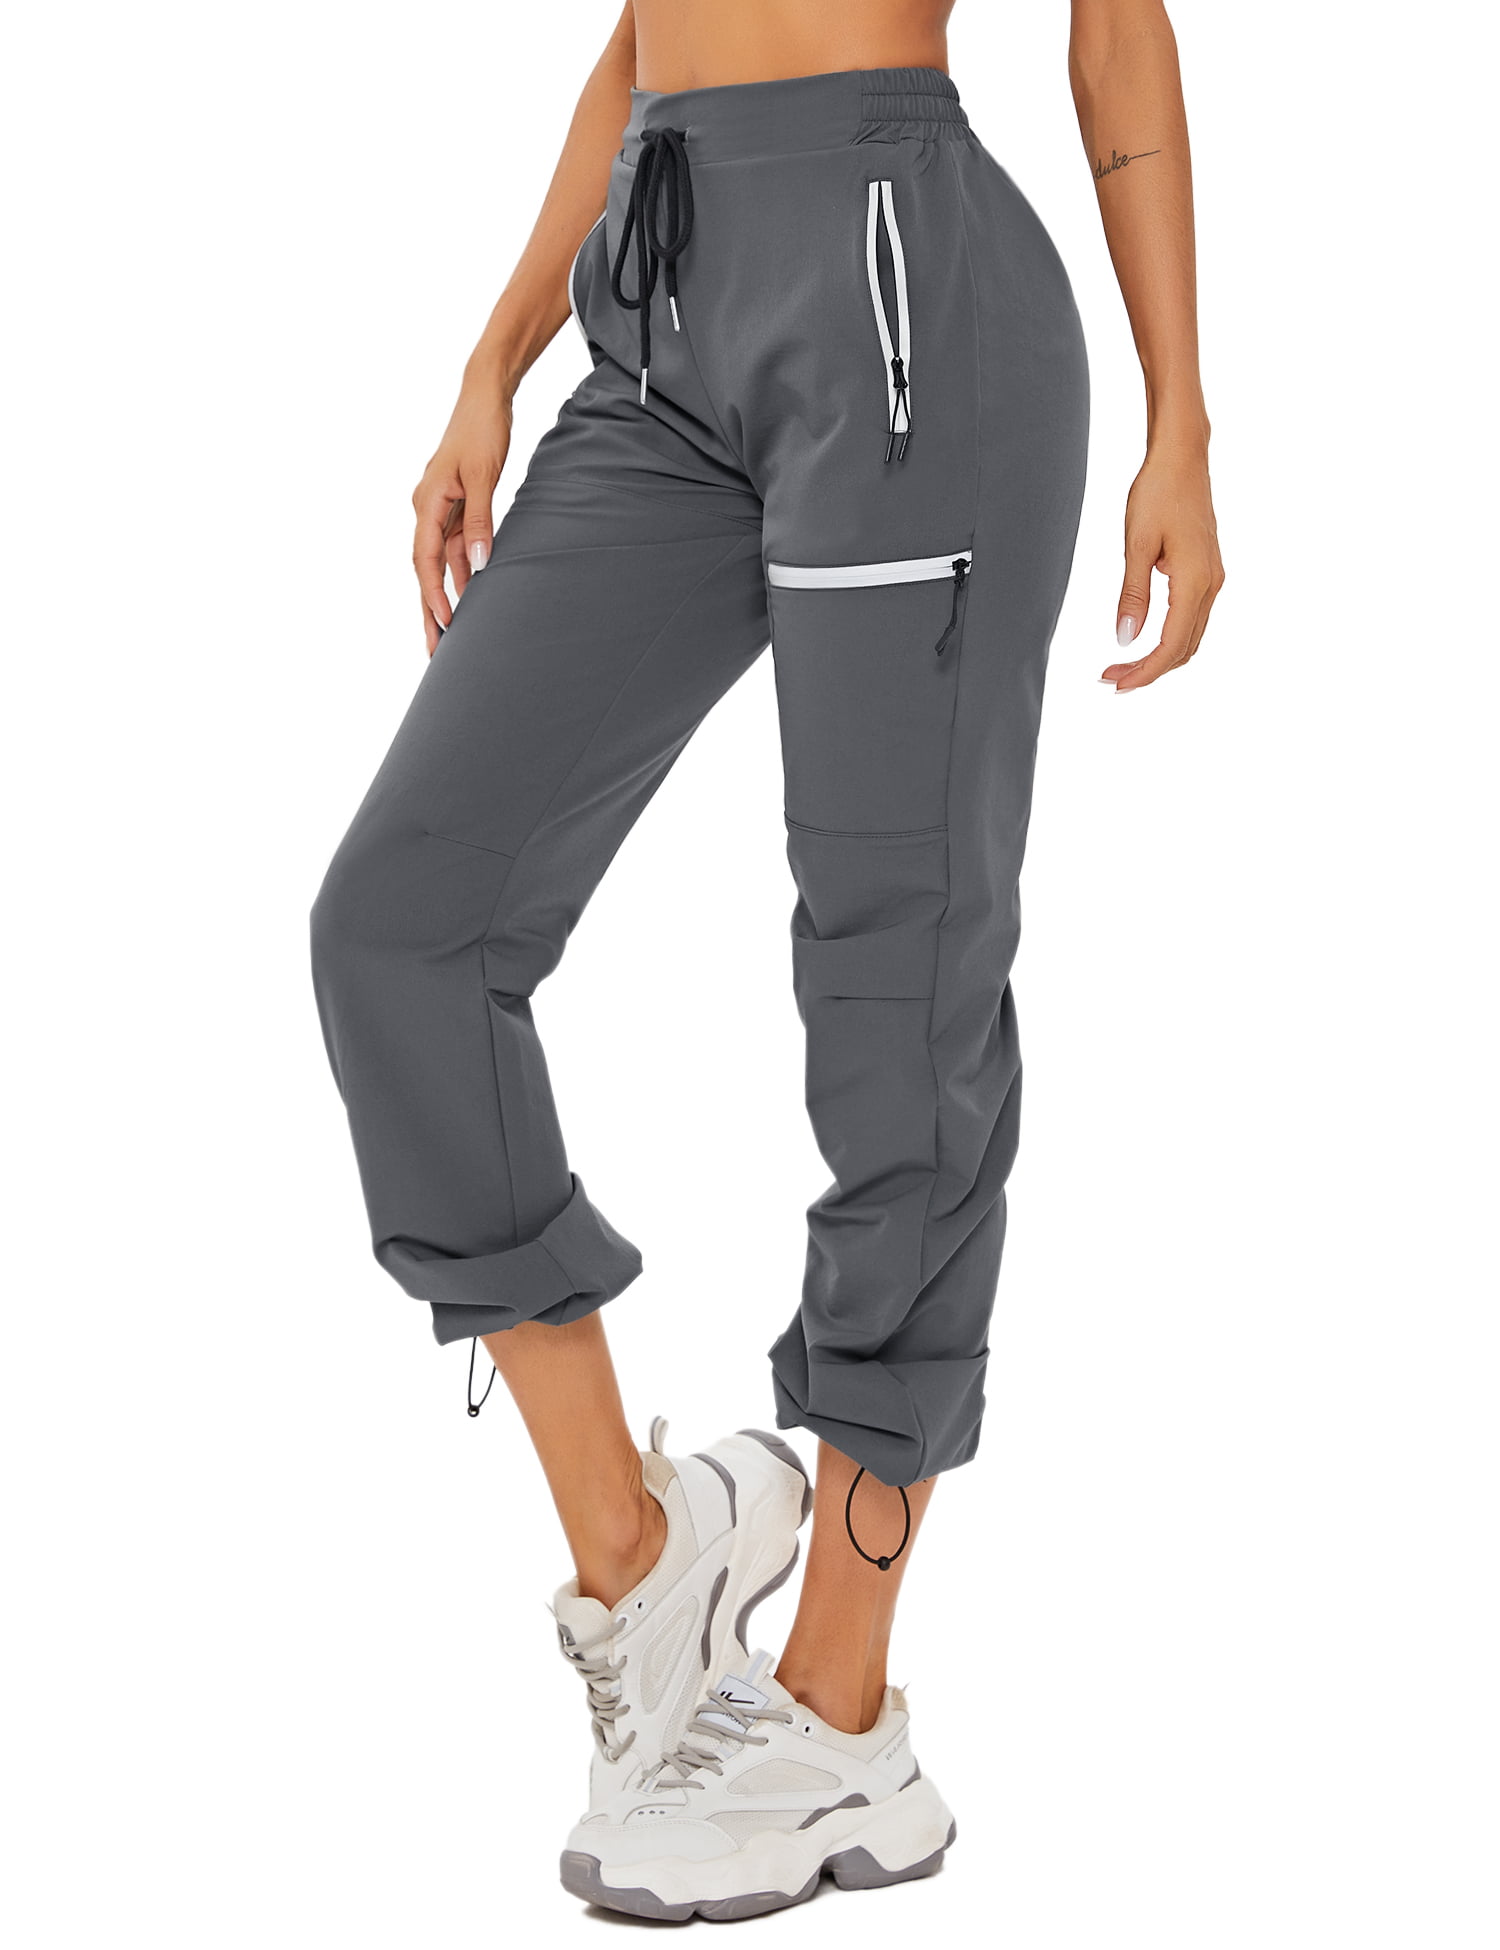 Sykooria Cropped Trousers Women Capri Joggers Sweatpants Drawstring Waist Cropped Tracksuit Bottoms with Pockets 